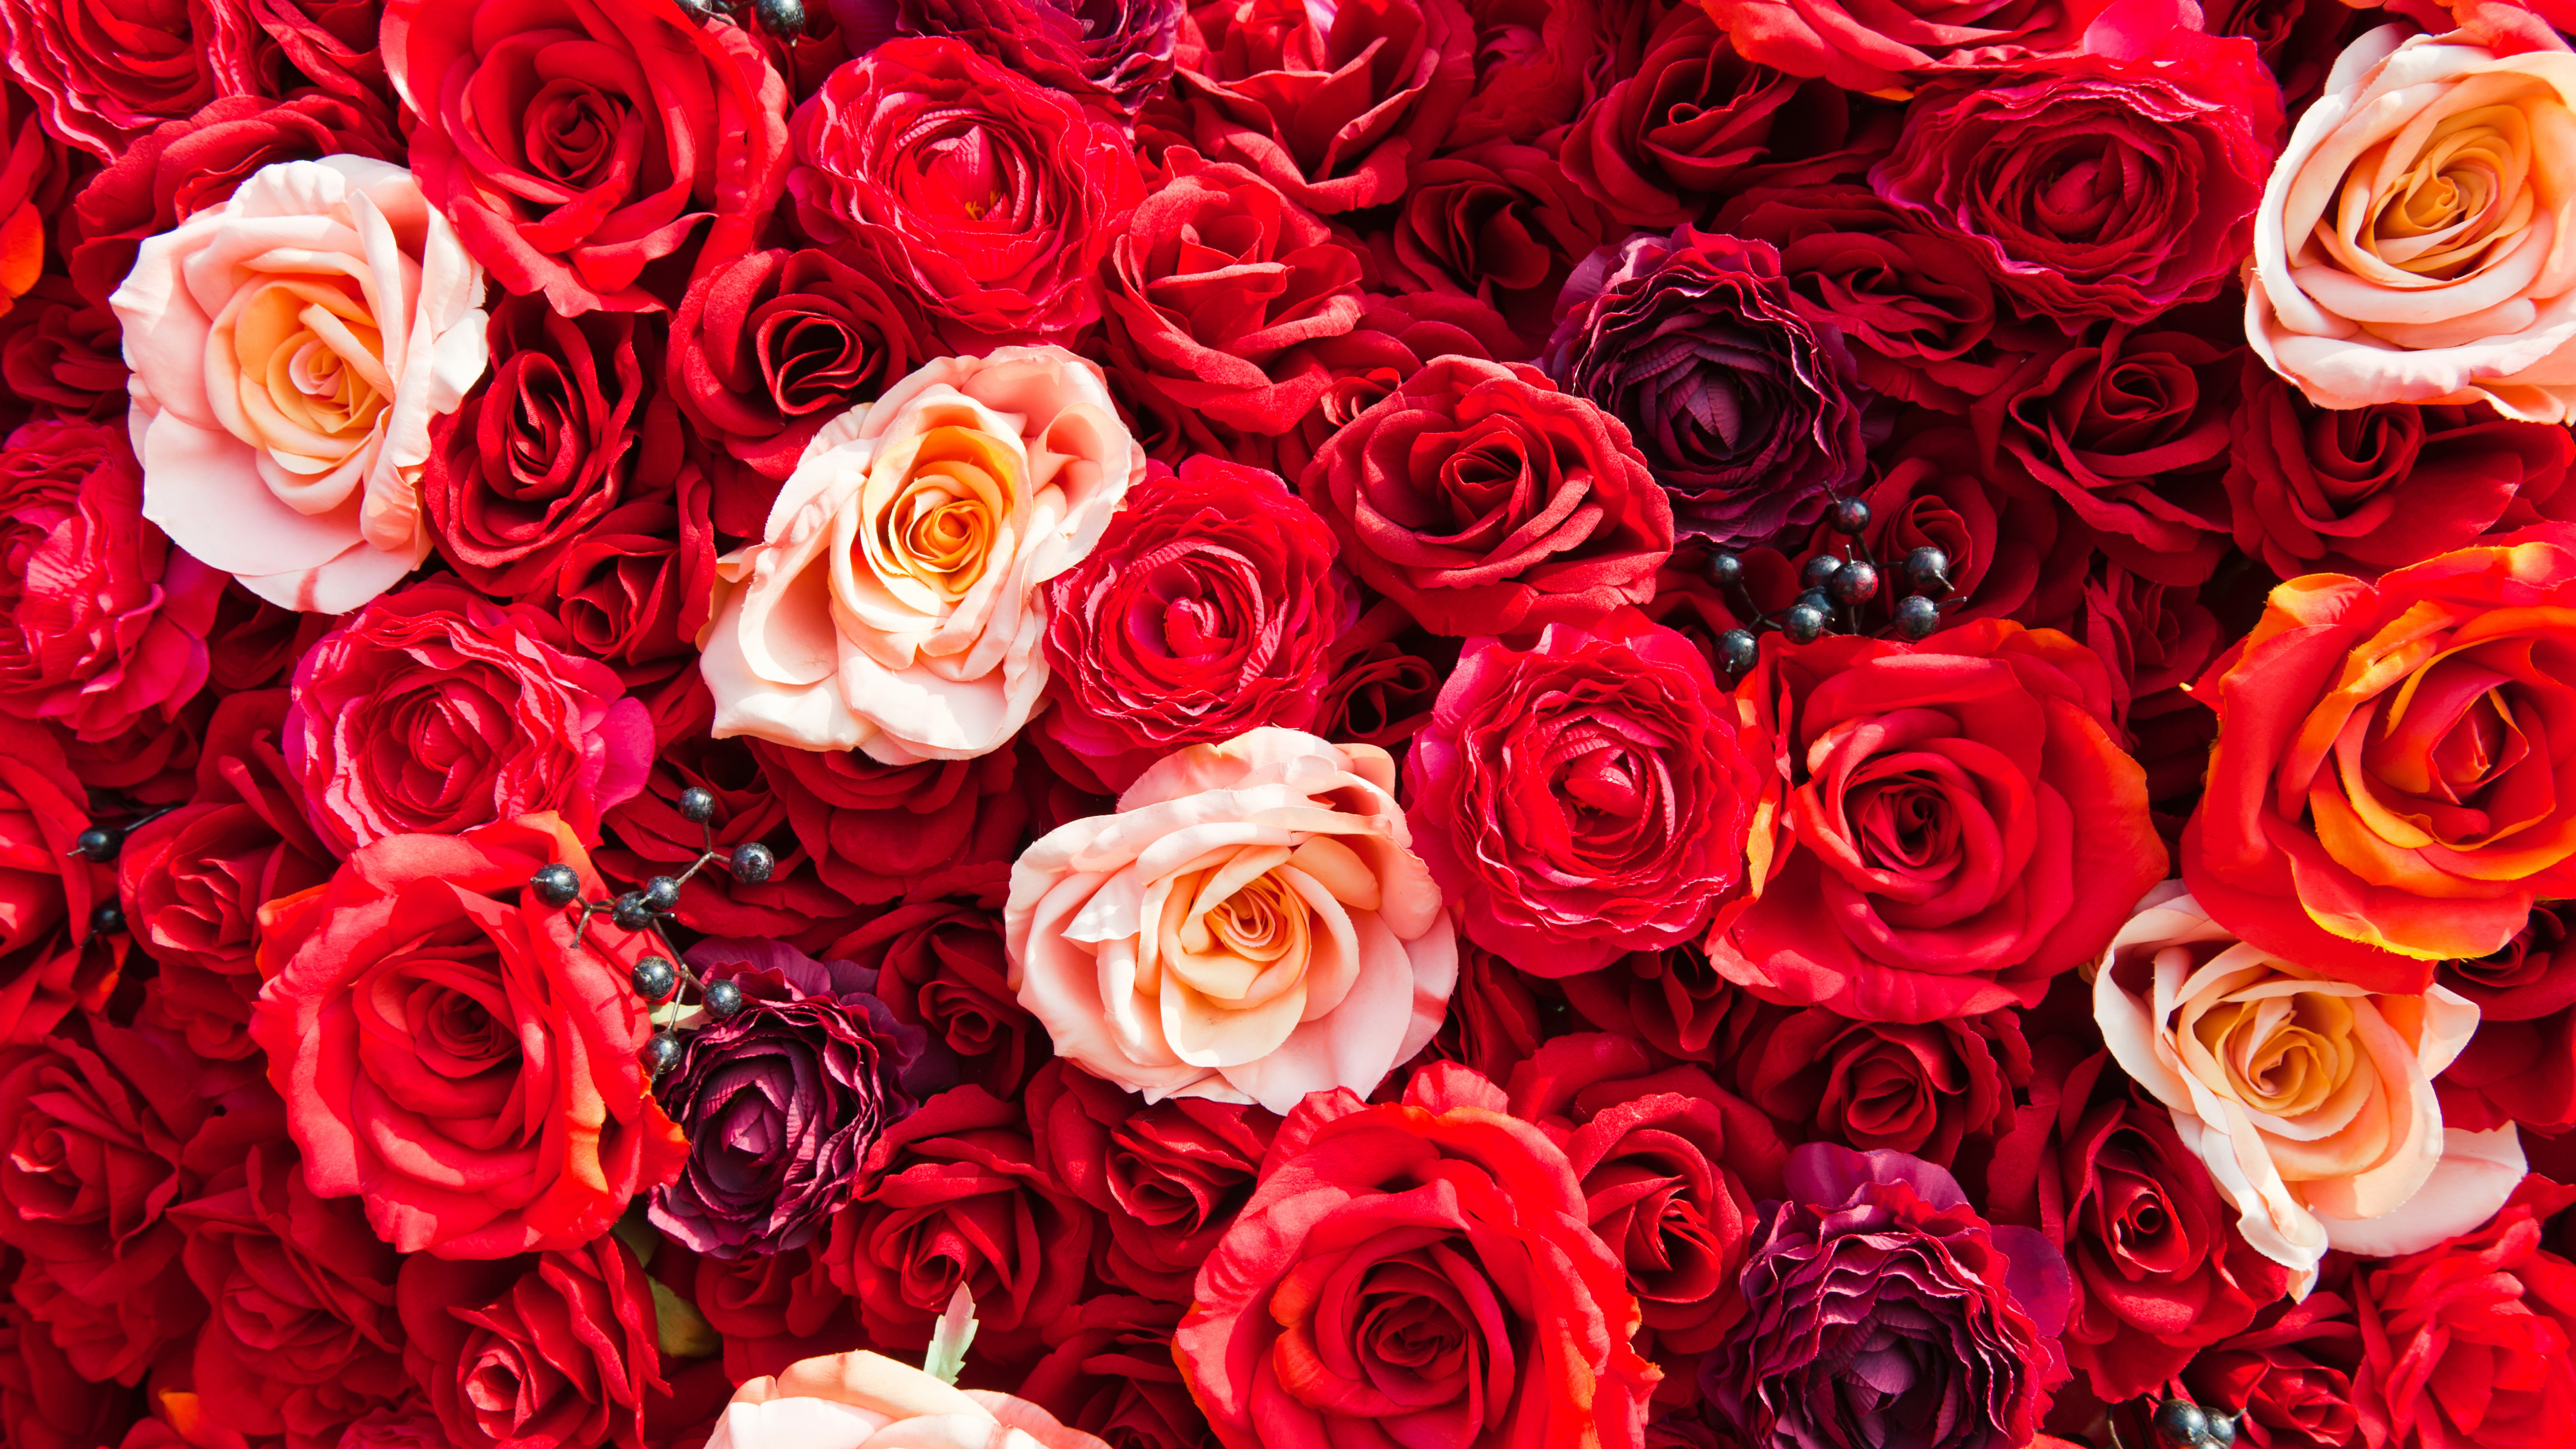 Red and White Roses Bouquet. Wallpaper in 7680x4320 Resolution